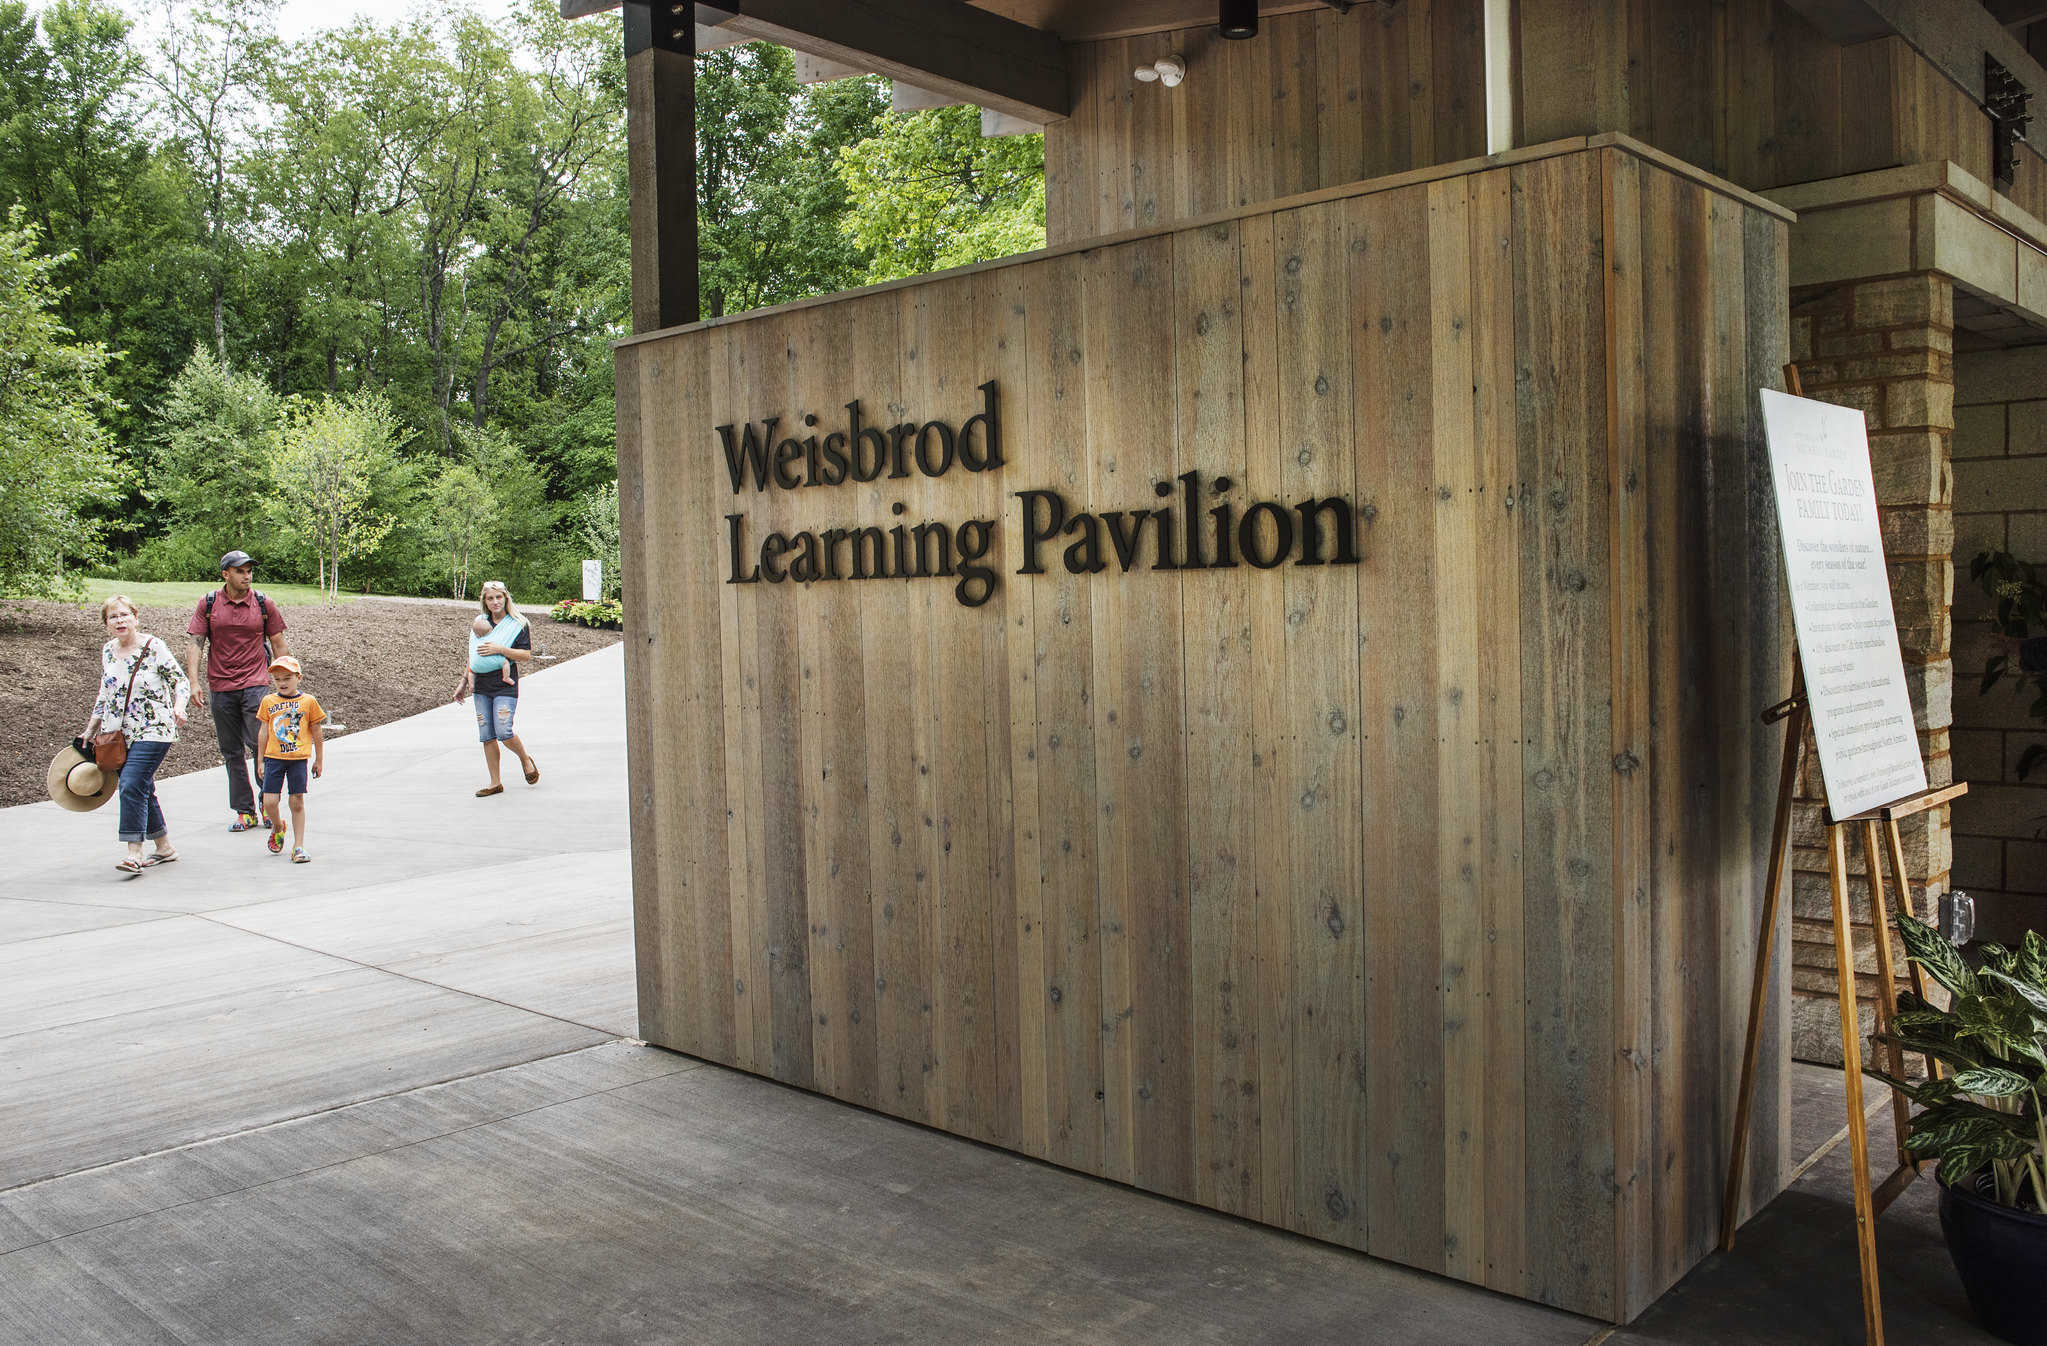 Weisbrod Learning Pavilion on opening day